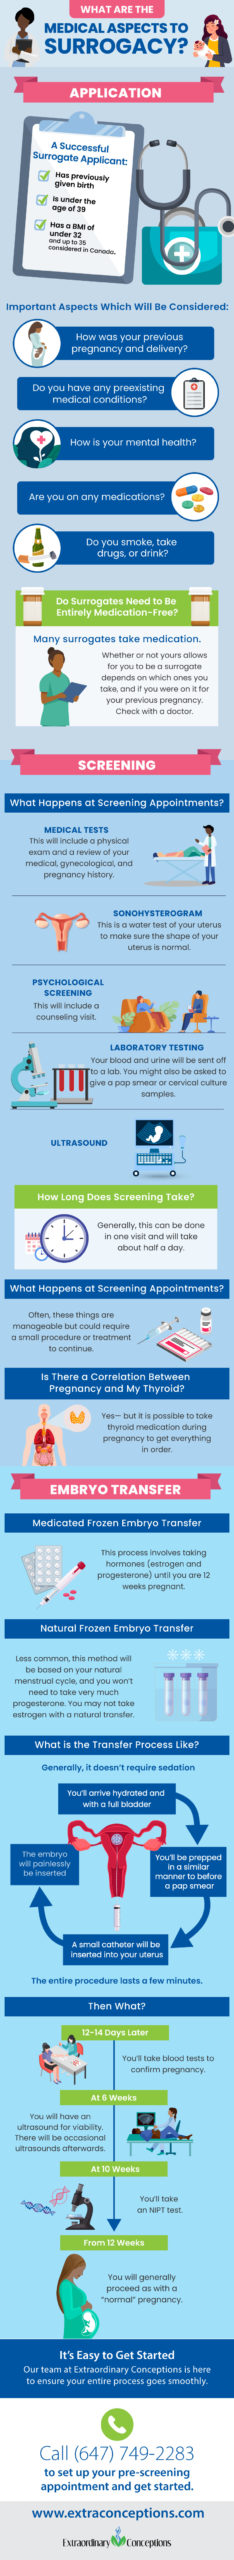 What are the Medical Aspects to Surrogacy? Infographic